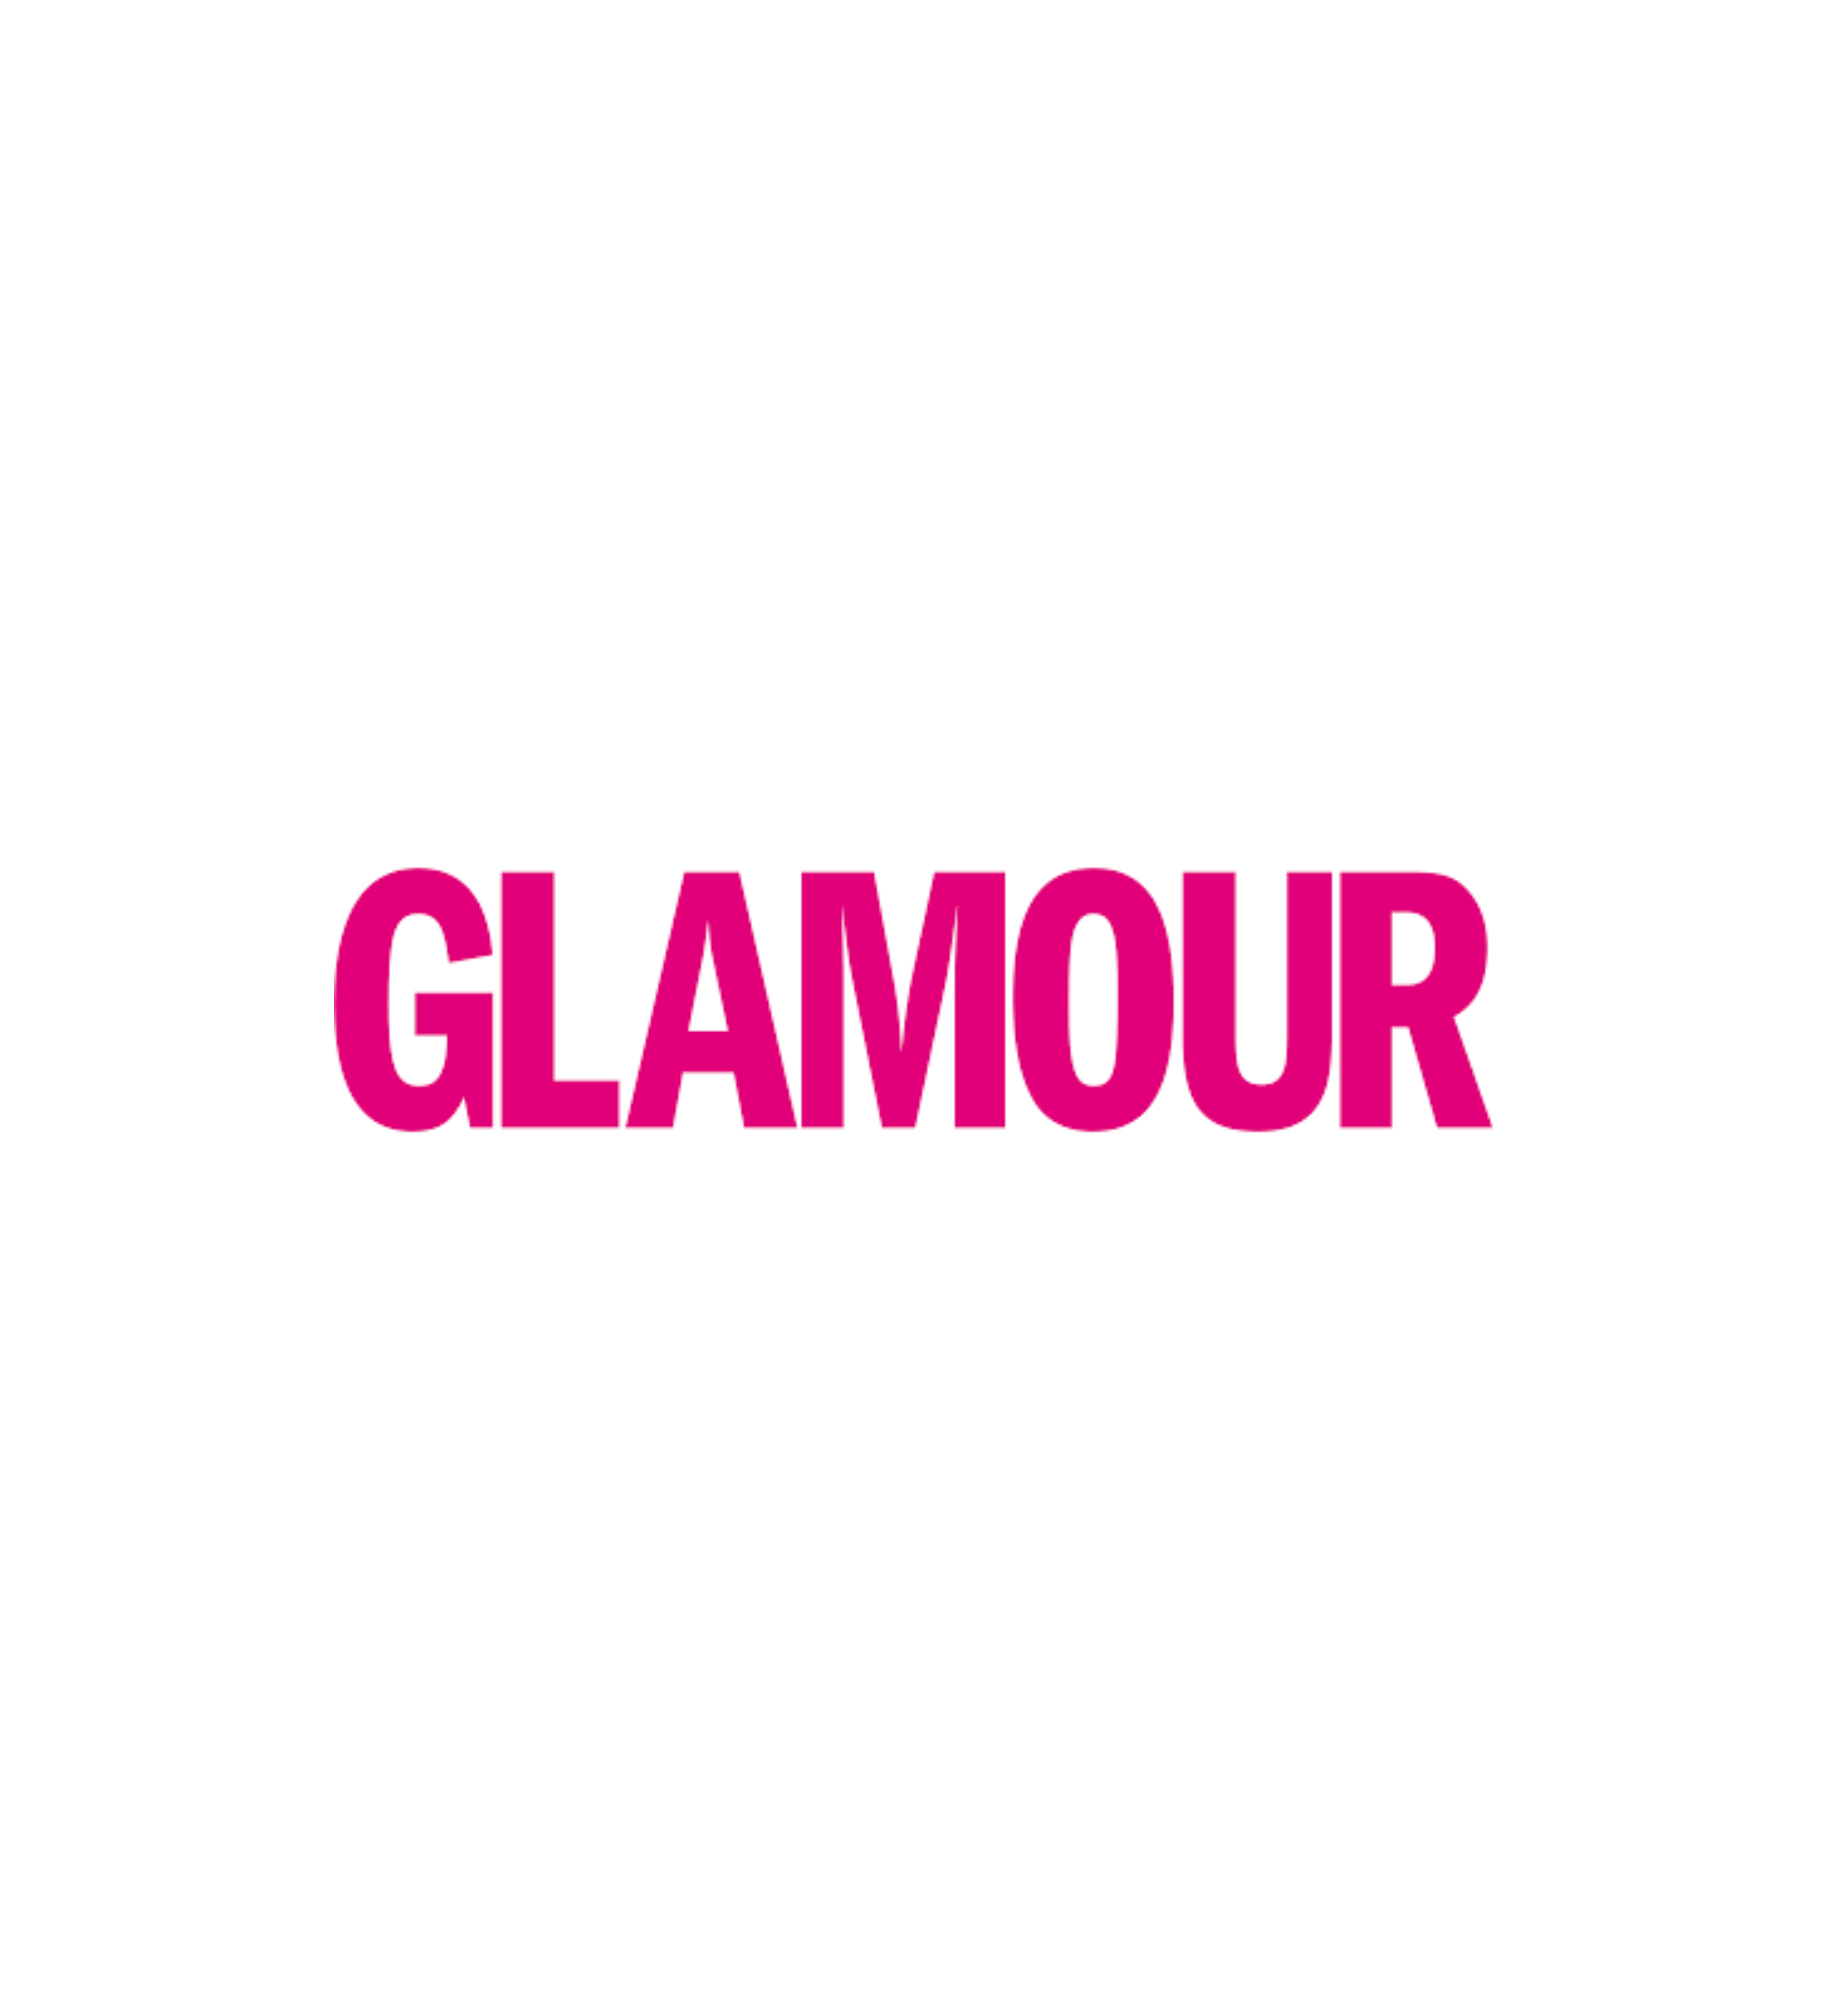 GLAMOUR_PINK.png